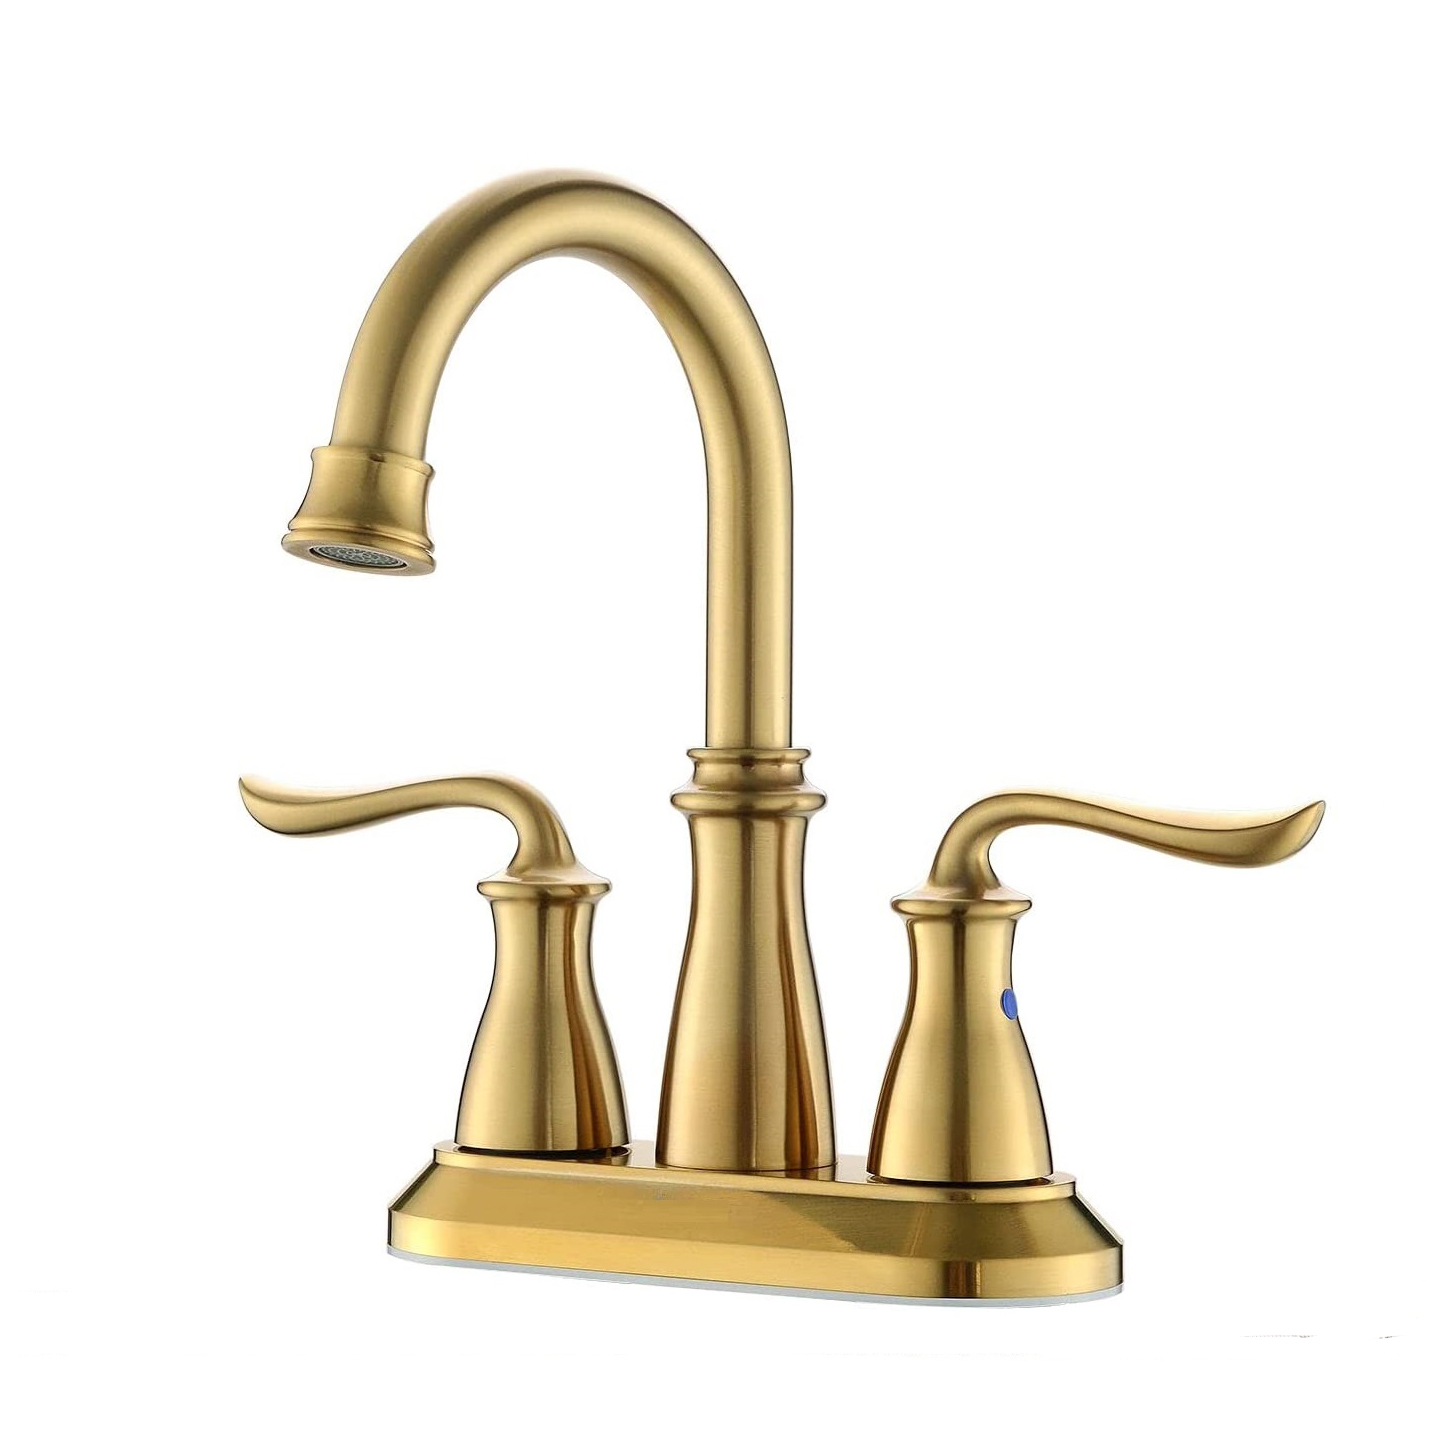 Boost Your Bathroom Looks with Brushed Gold Bathroom Faucets